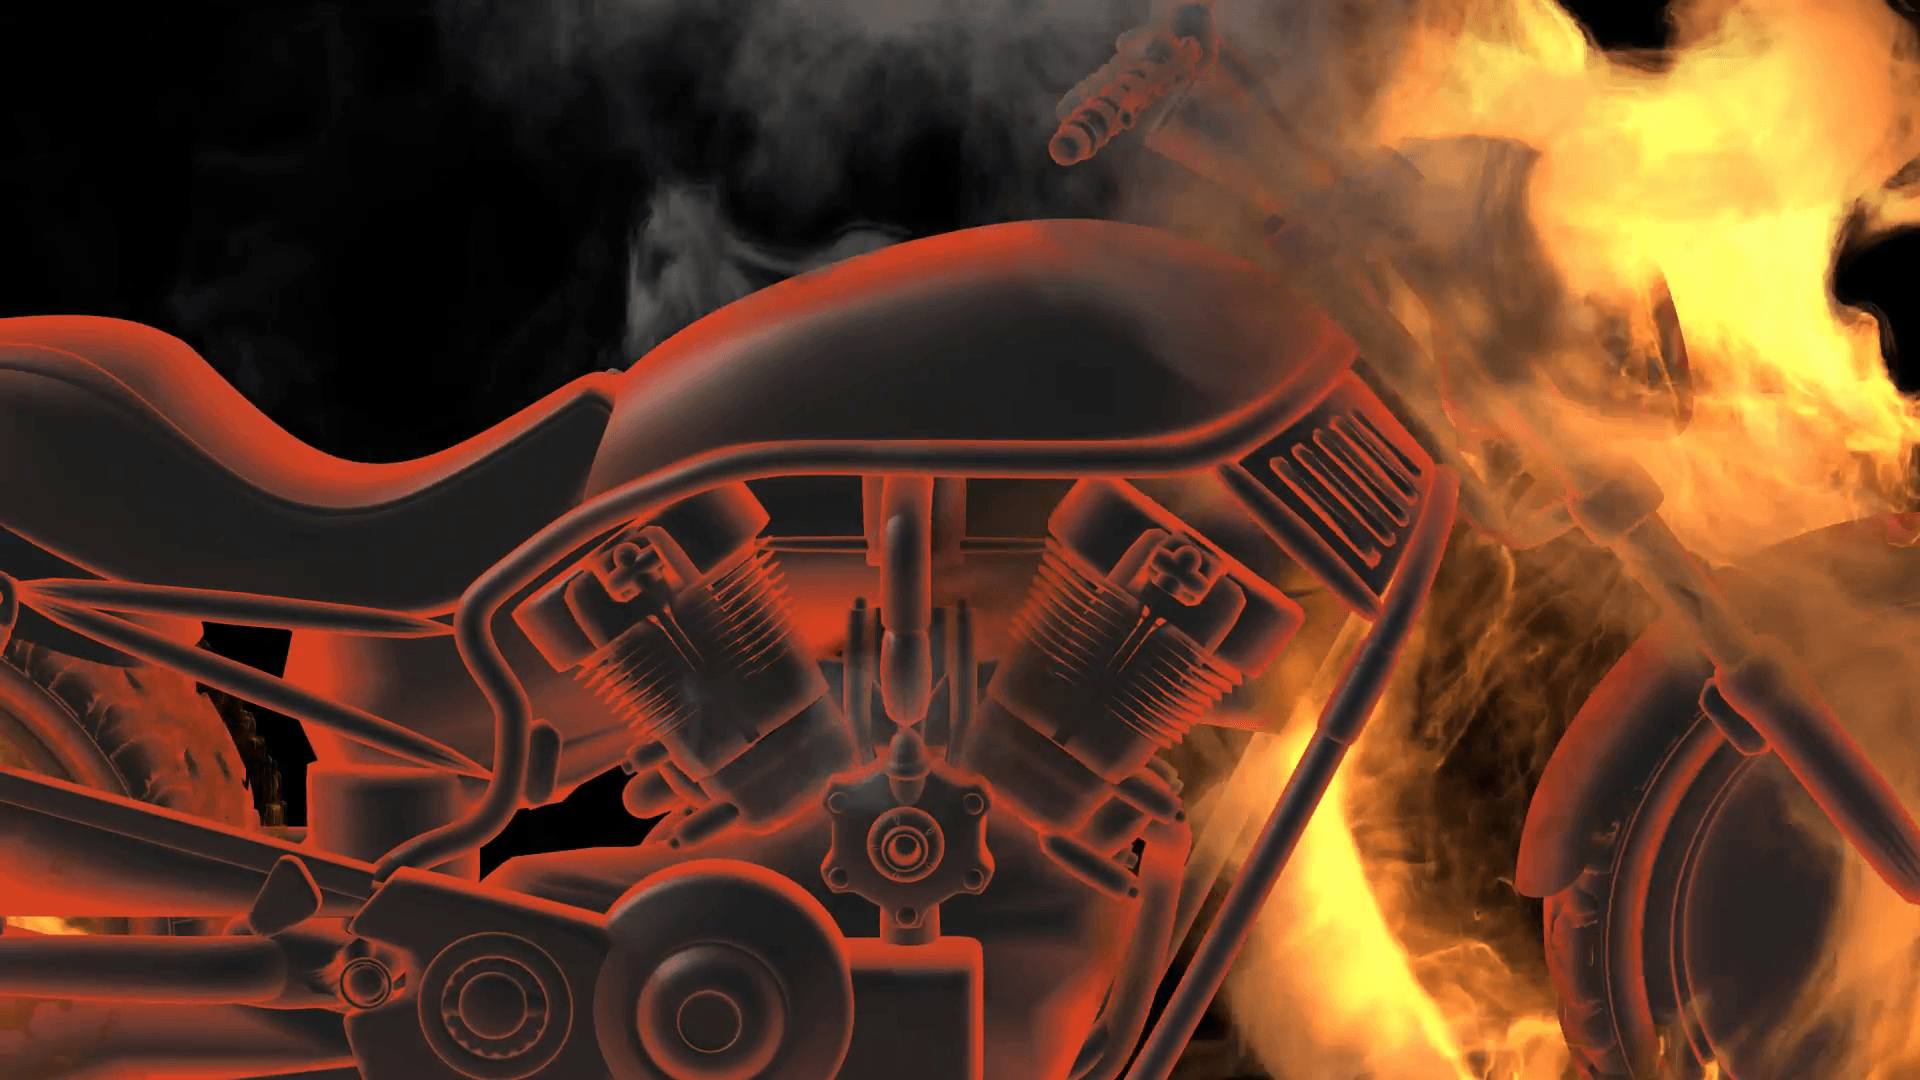 chopper bike in fire rendered in PNG with alpha channel Motion